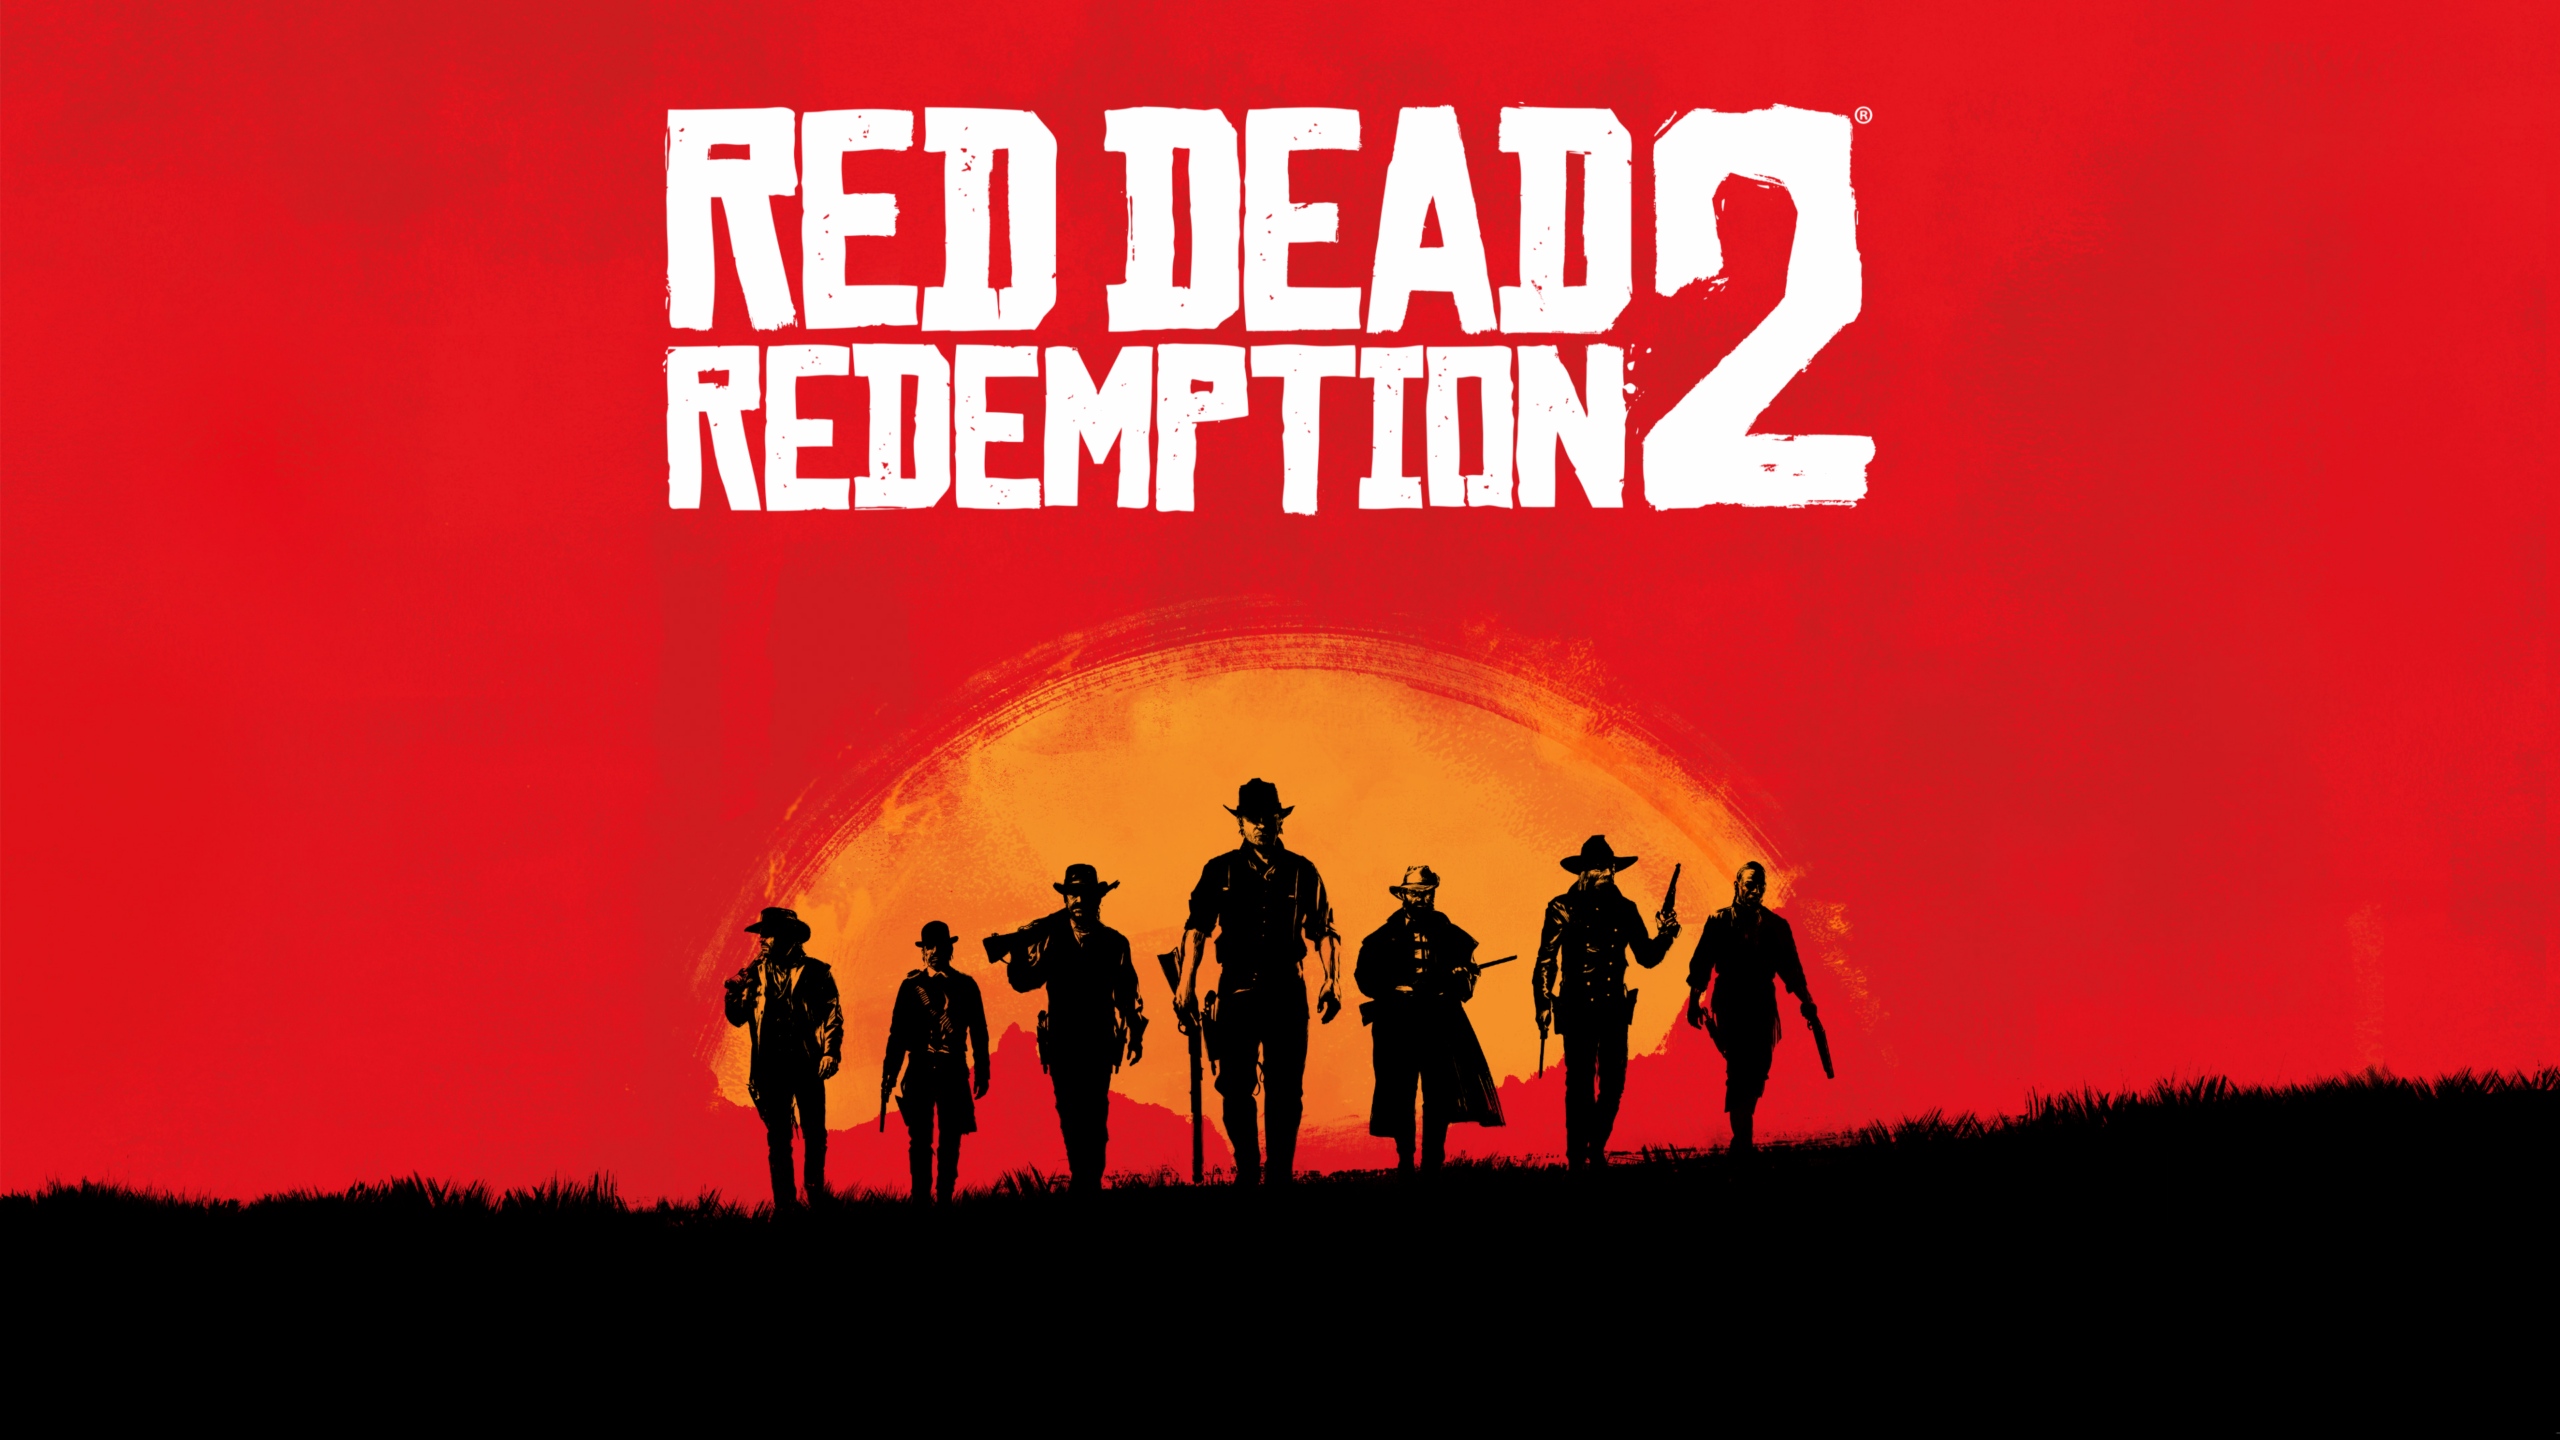 Red Dead Redemption 2 Wallpaper Free Download In 4k Resolution 1080p The Indian Wire